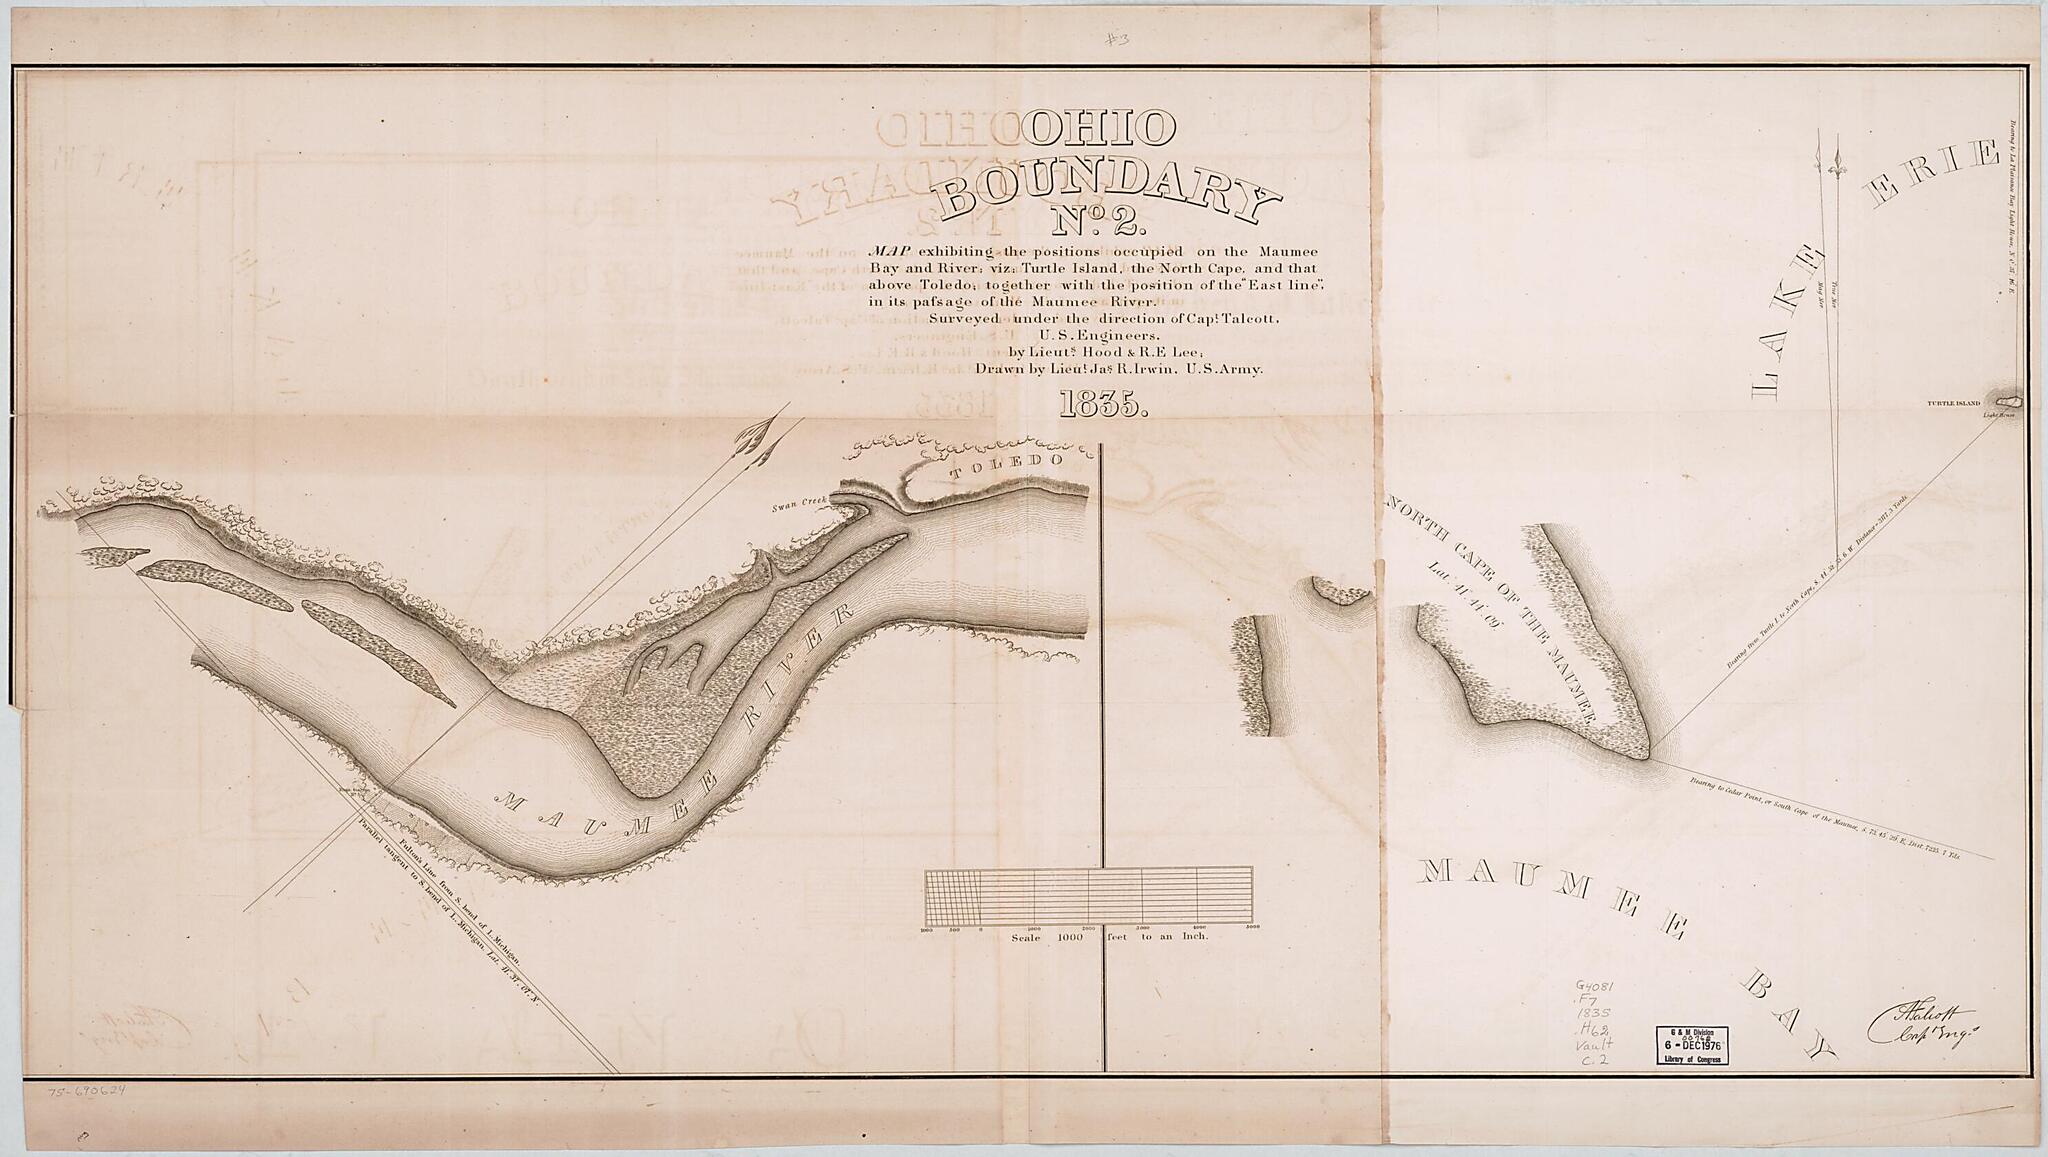 This old map of Ohio Boundary, No. 2. Map Exhibiting the Positions Occupied On the Maumee Bay and River; Viz: Turtle Island, the North Cape, and That Above Toledo; Together With the Position of the East Line, In Its Passage of the Maumee River from 1835 